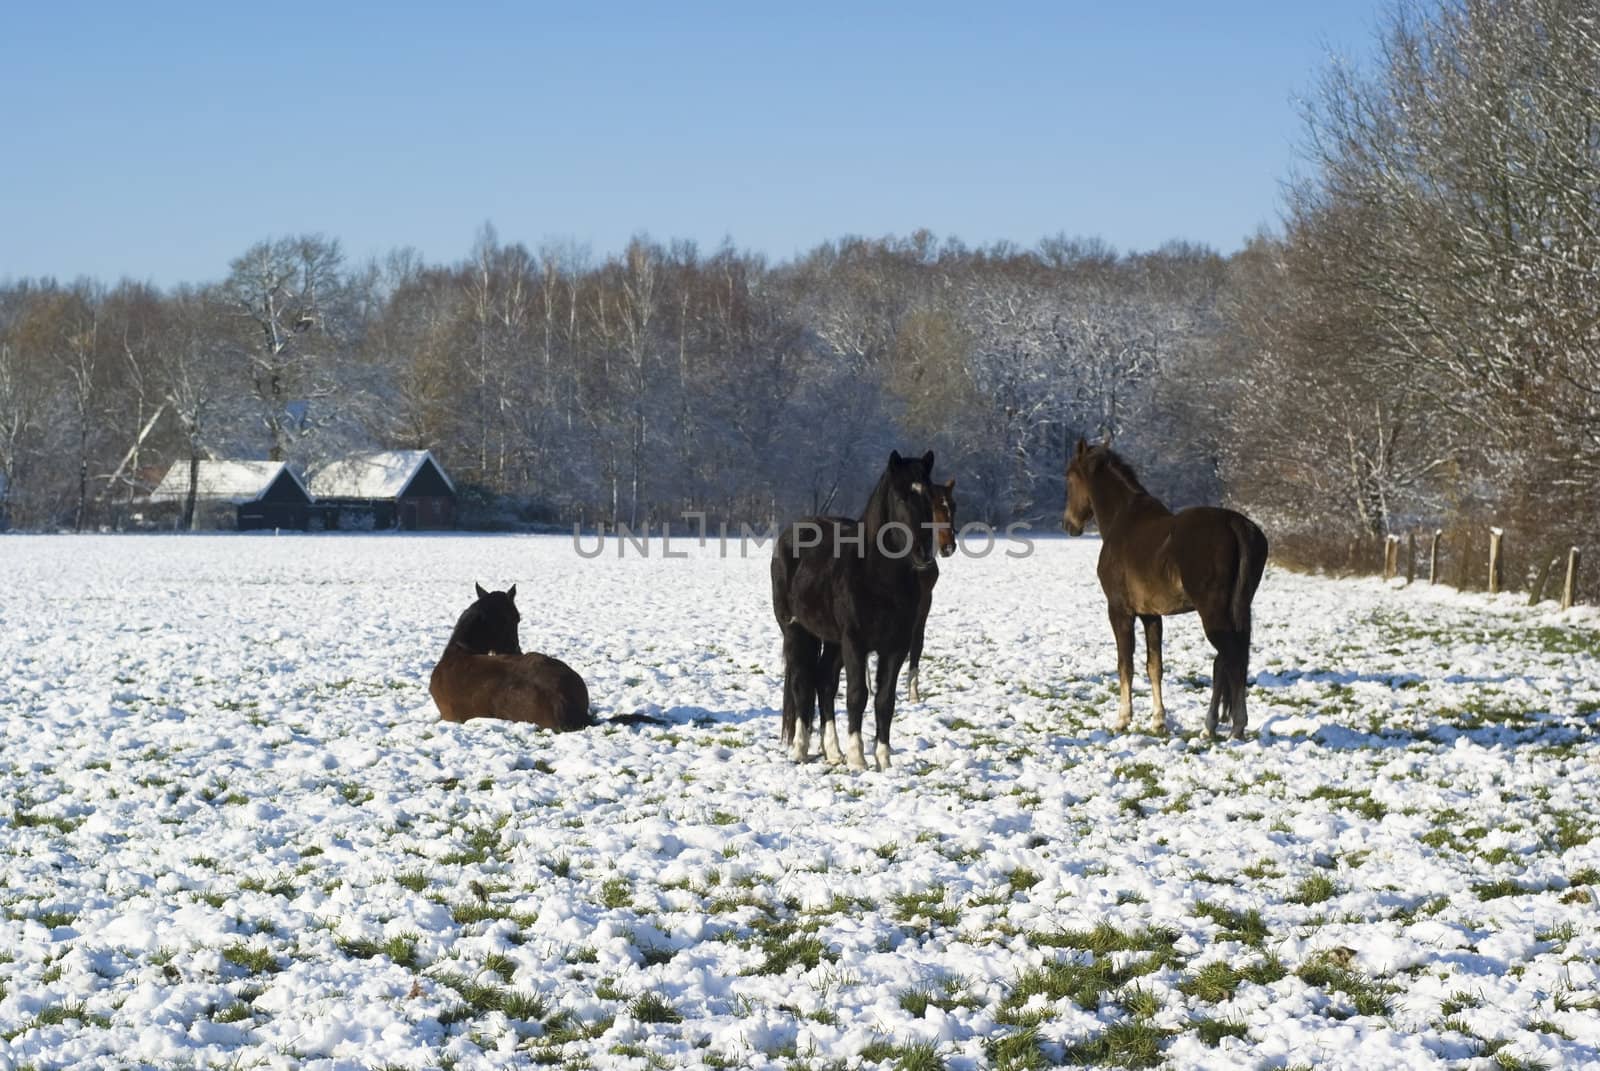 Horses in snowy winter. by SasPartout